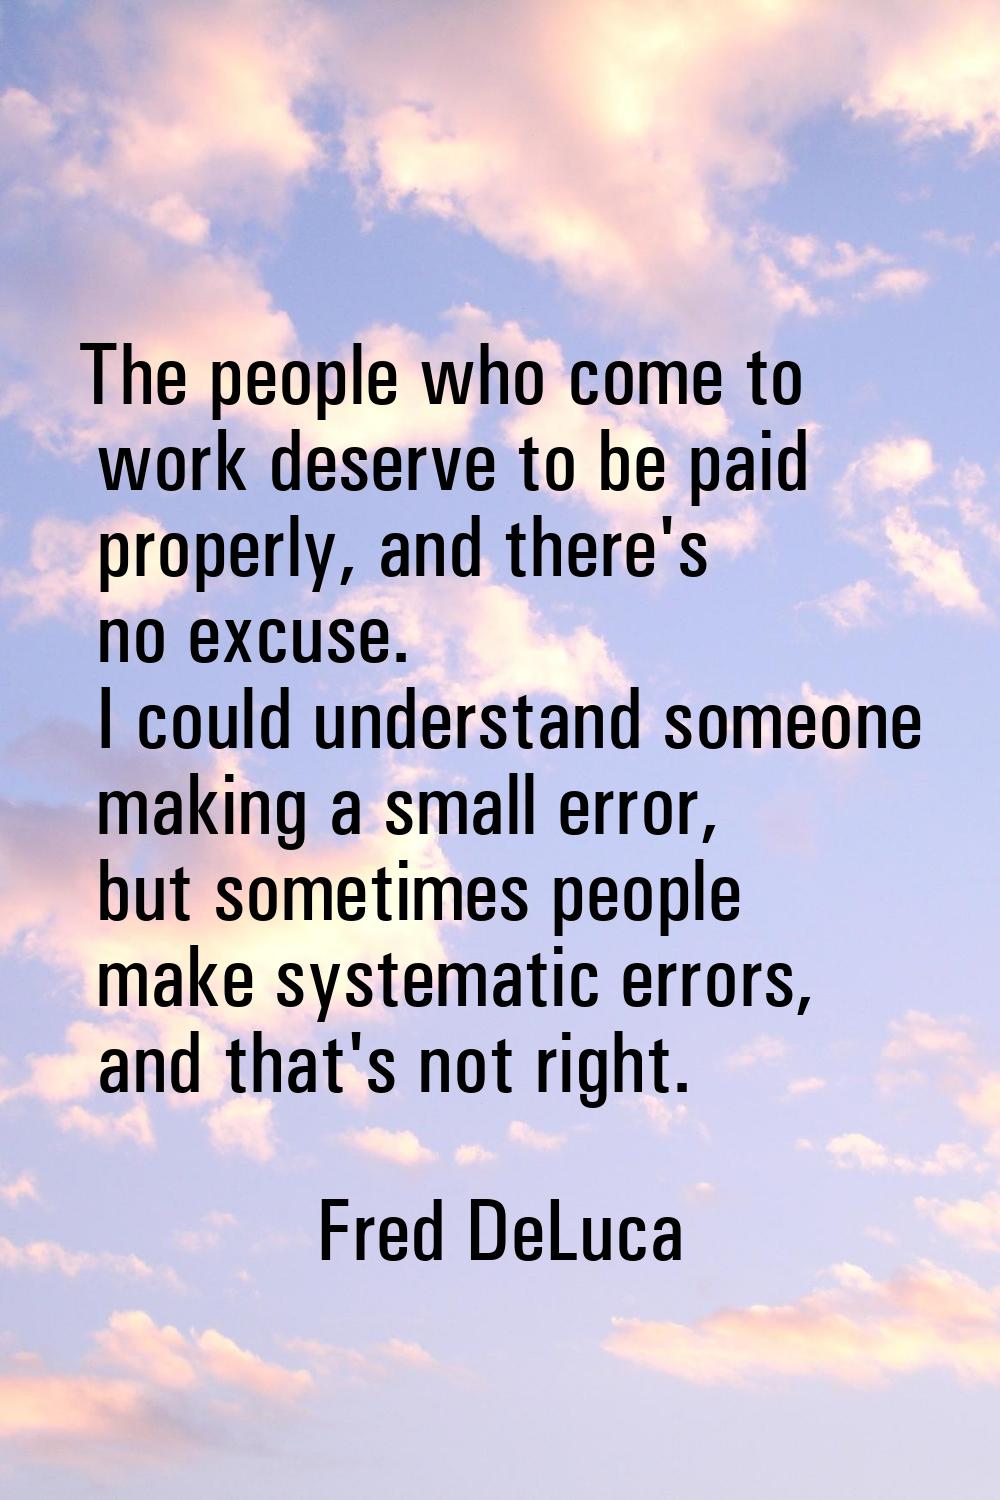 The people who come to work deserve to be paid properly, and there's no excuse. I could understand 